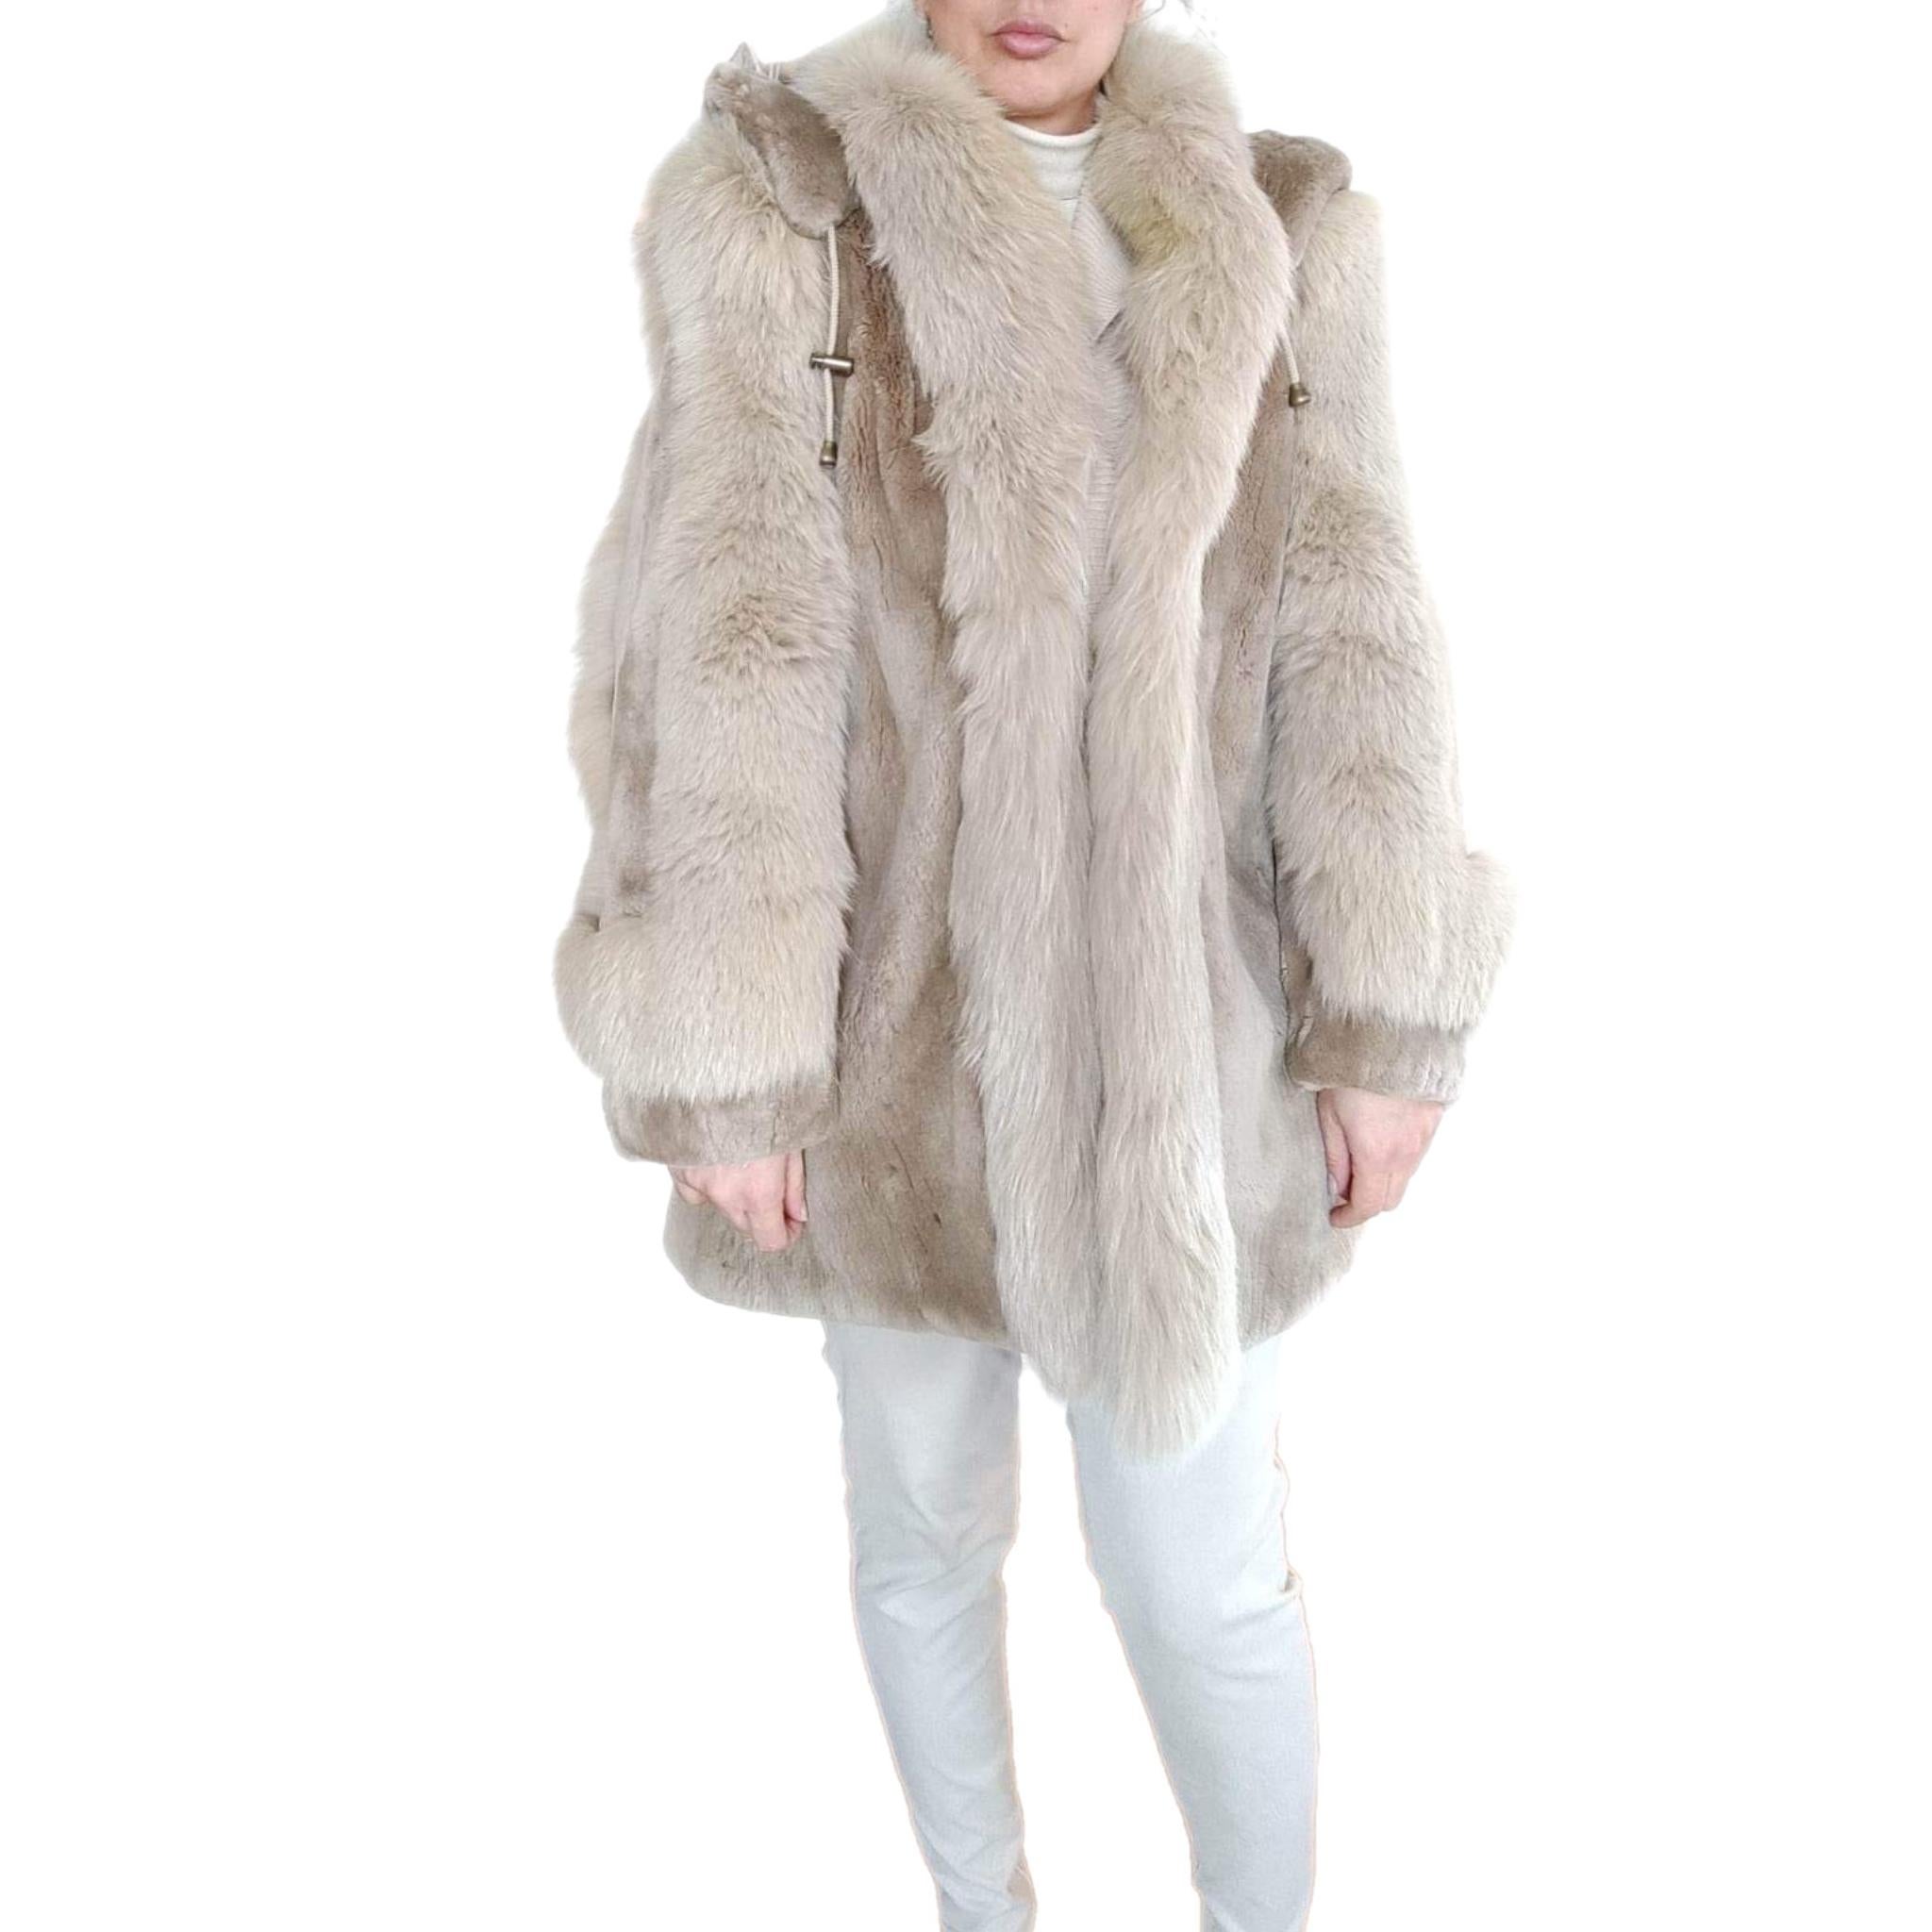 PRODUCT DESCRIPTION:

Sheared Beaver Fur Coat with Fur Trim (Size 8-M)

Condition: good 

Closure: Hooks & Eyes

Color: Cream, beige

Material: Sheared Beaver

Garment type: short jacket

Sleeves: Dolman with bracelet cuff

Pockets: Two side